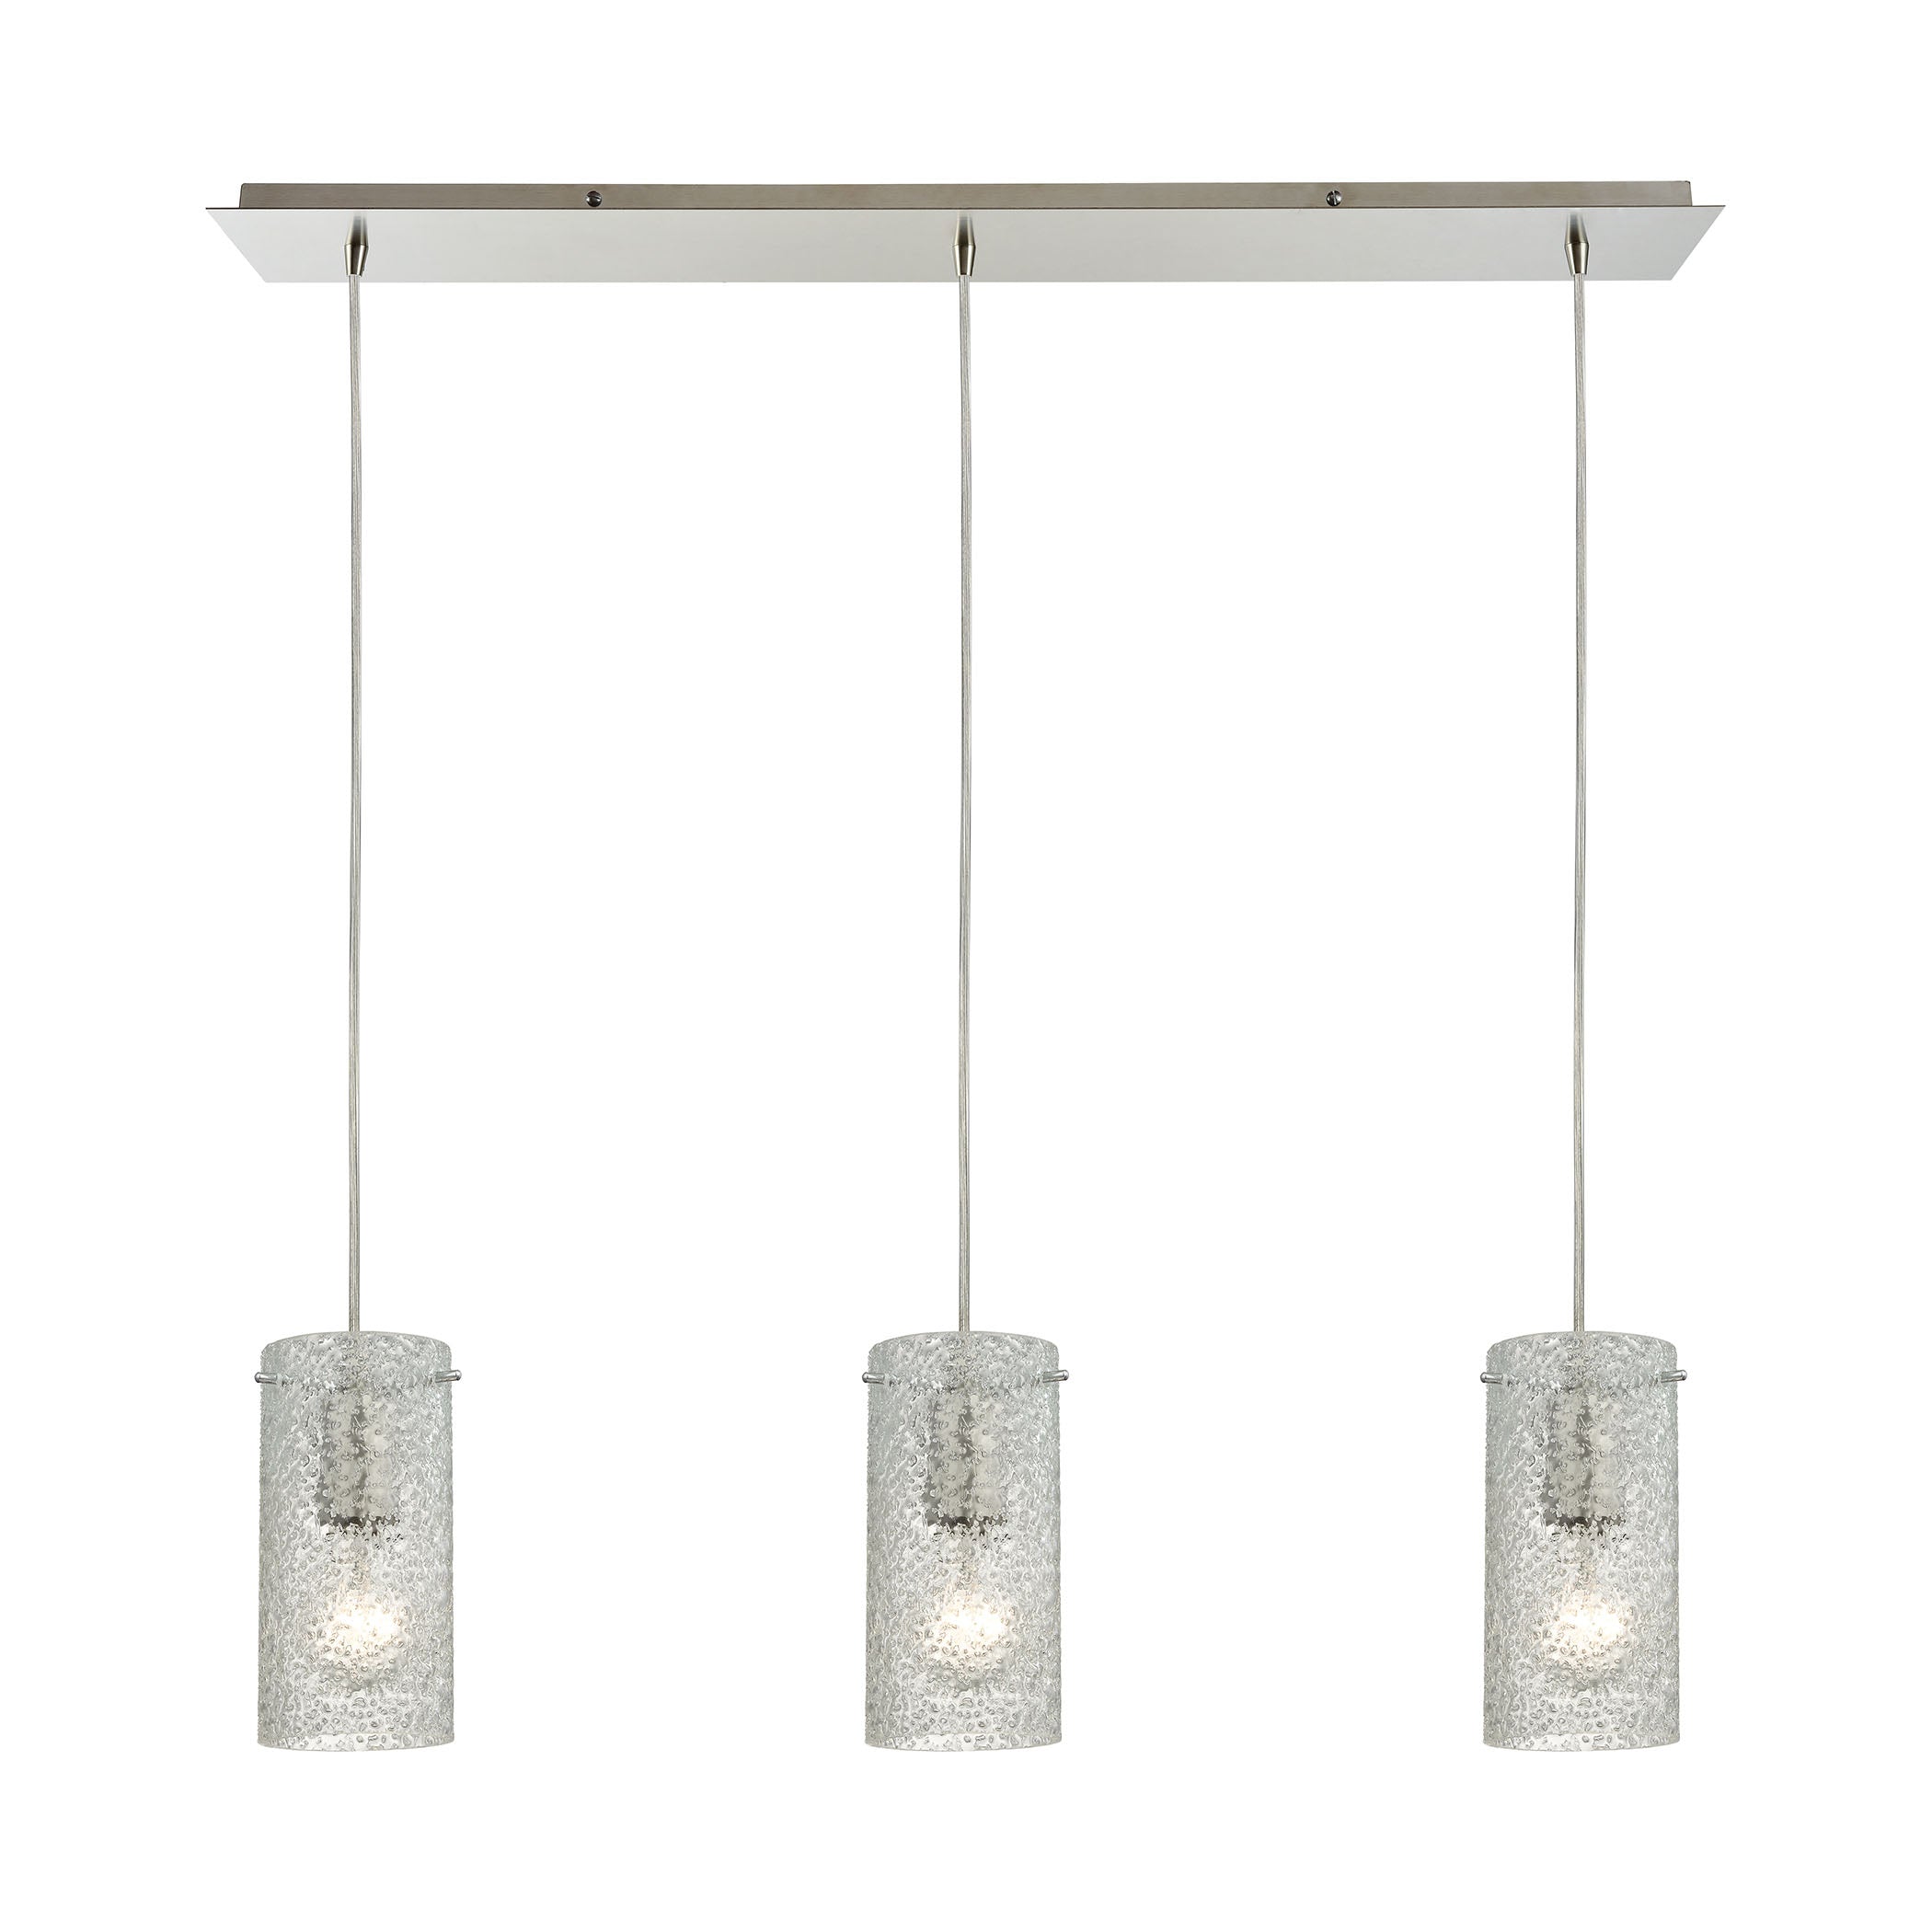 ELK Lighting 10242/3LP Ice Fragments 3-Light Linear Pendant Fixture in Satin Nickel with Clear Glass